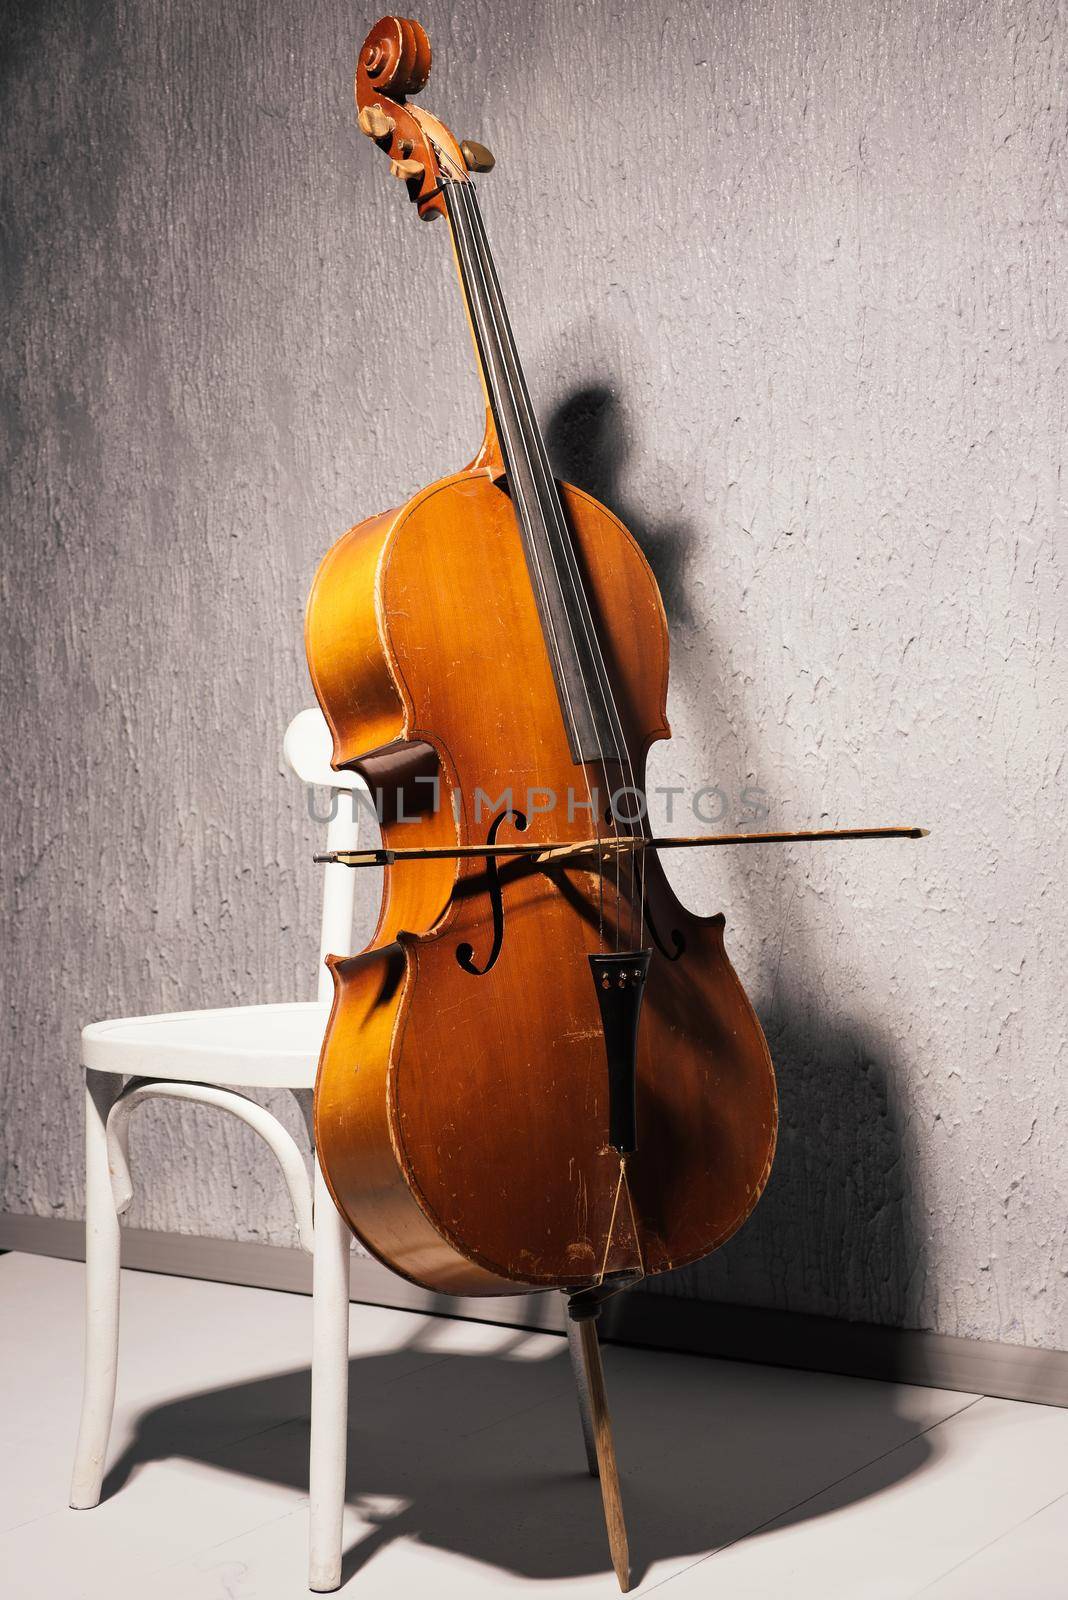 Violin on chair at school or practice room ,During the practice break time to prepare For the concert by zartarn